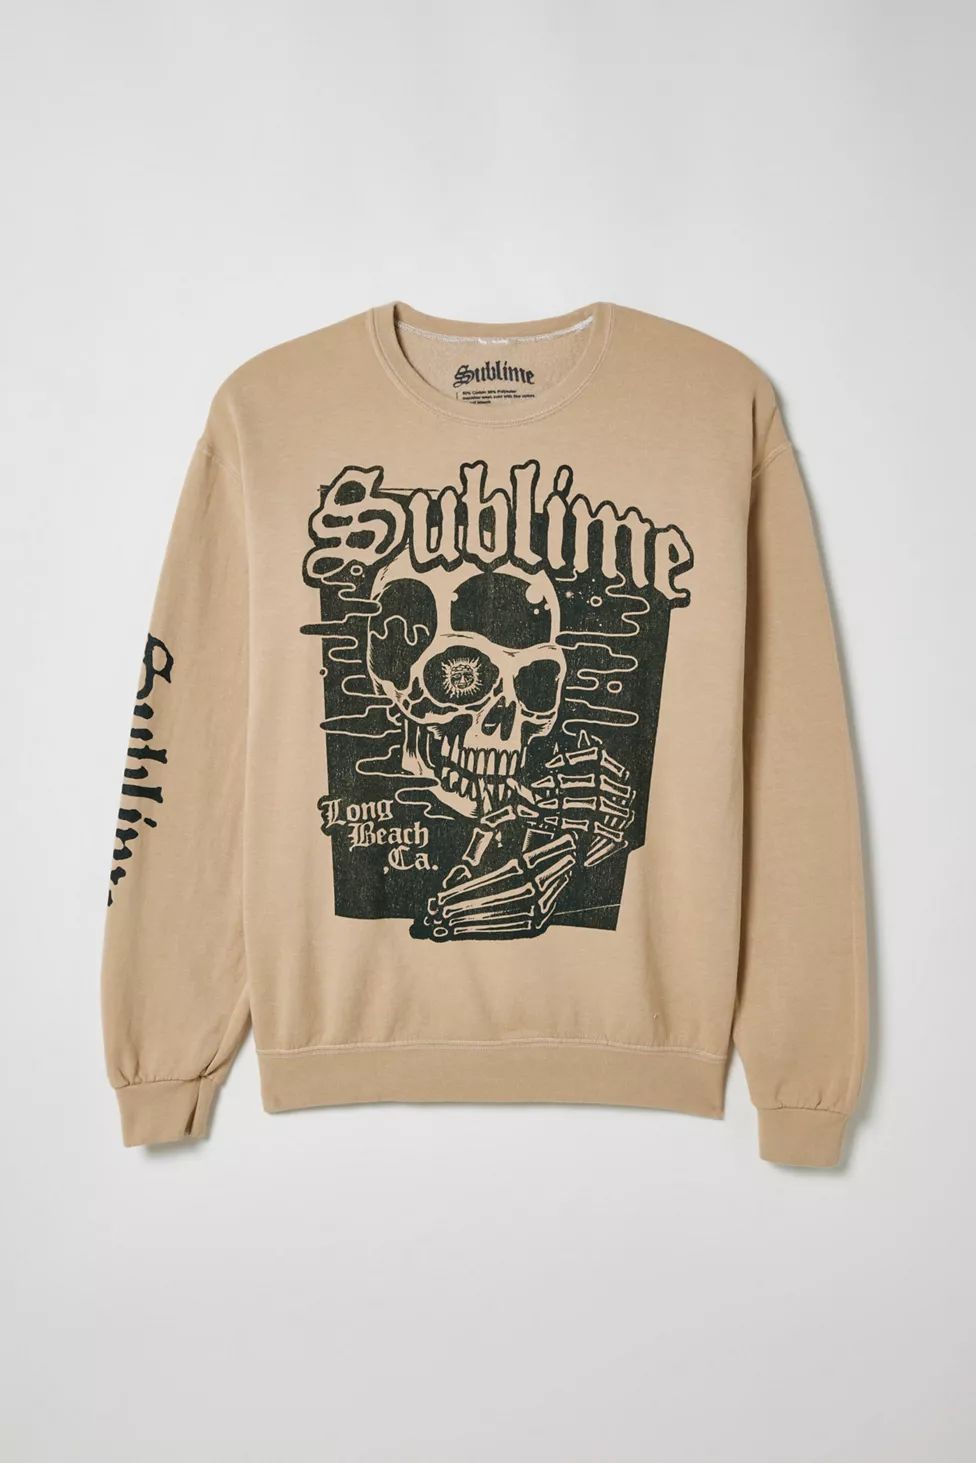 Sublime Skull Long Beach Crew Neck Sweatshirt | Urban Outfitters (US and RoW)